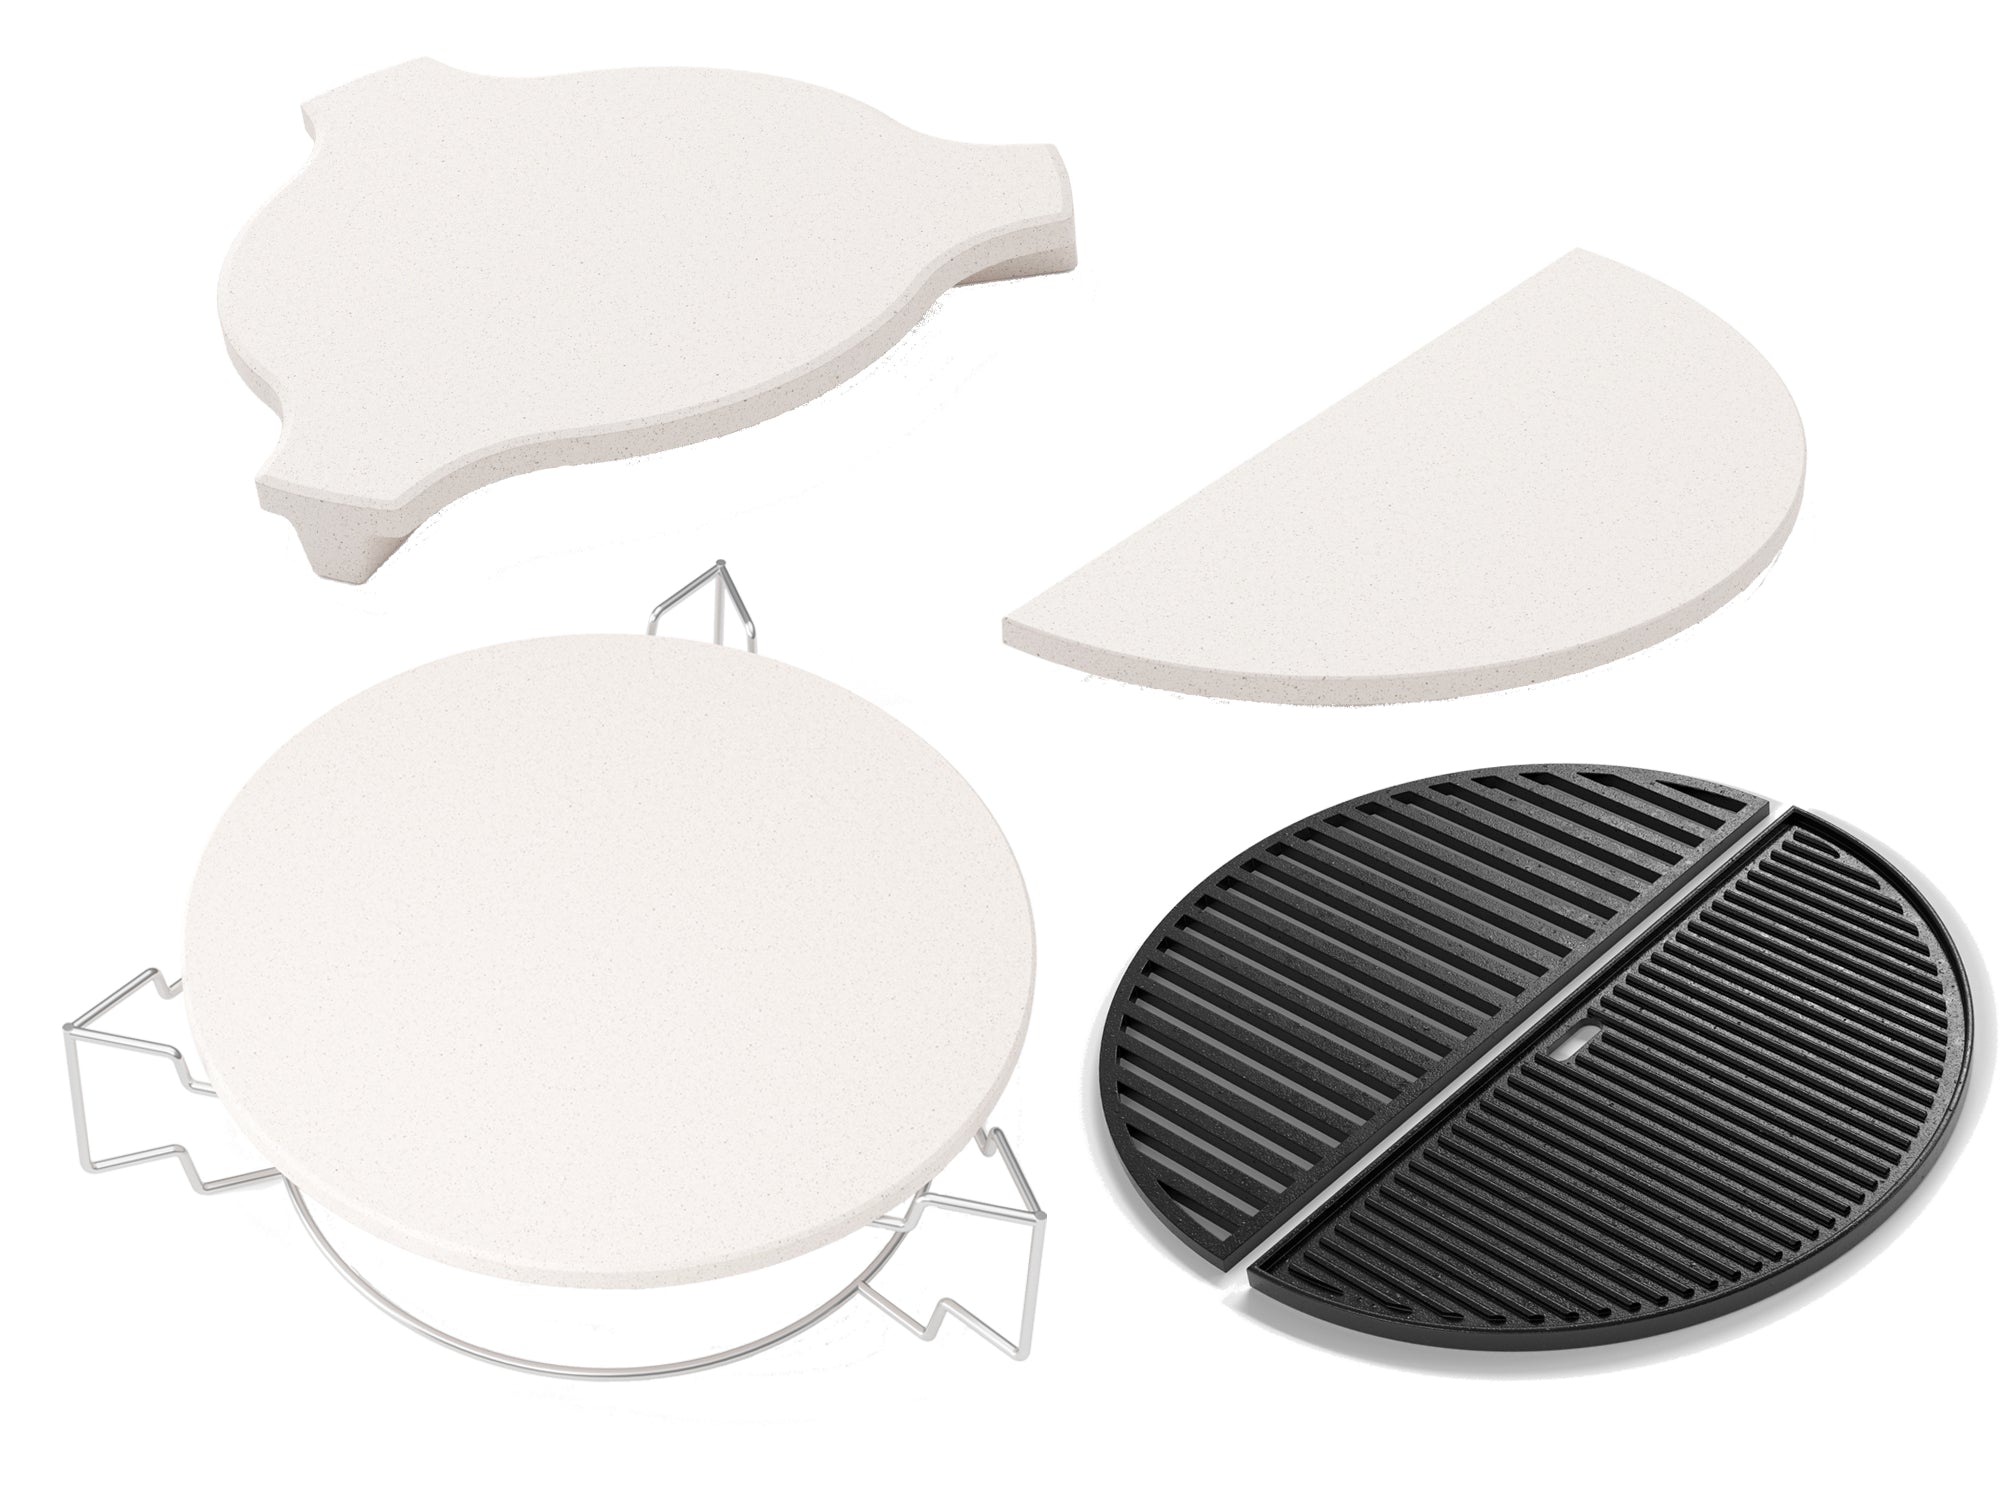 Outdoor Kitchen Kamado 4-Piece Bundle (22 in. Pizza Stone Assembly, 22 in. Cast Iron Griddle, 11 in. Heat Diffuser, 14 in. Half Moon Heat Diffuser)